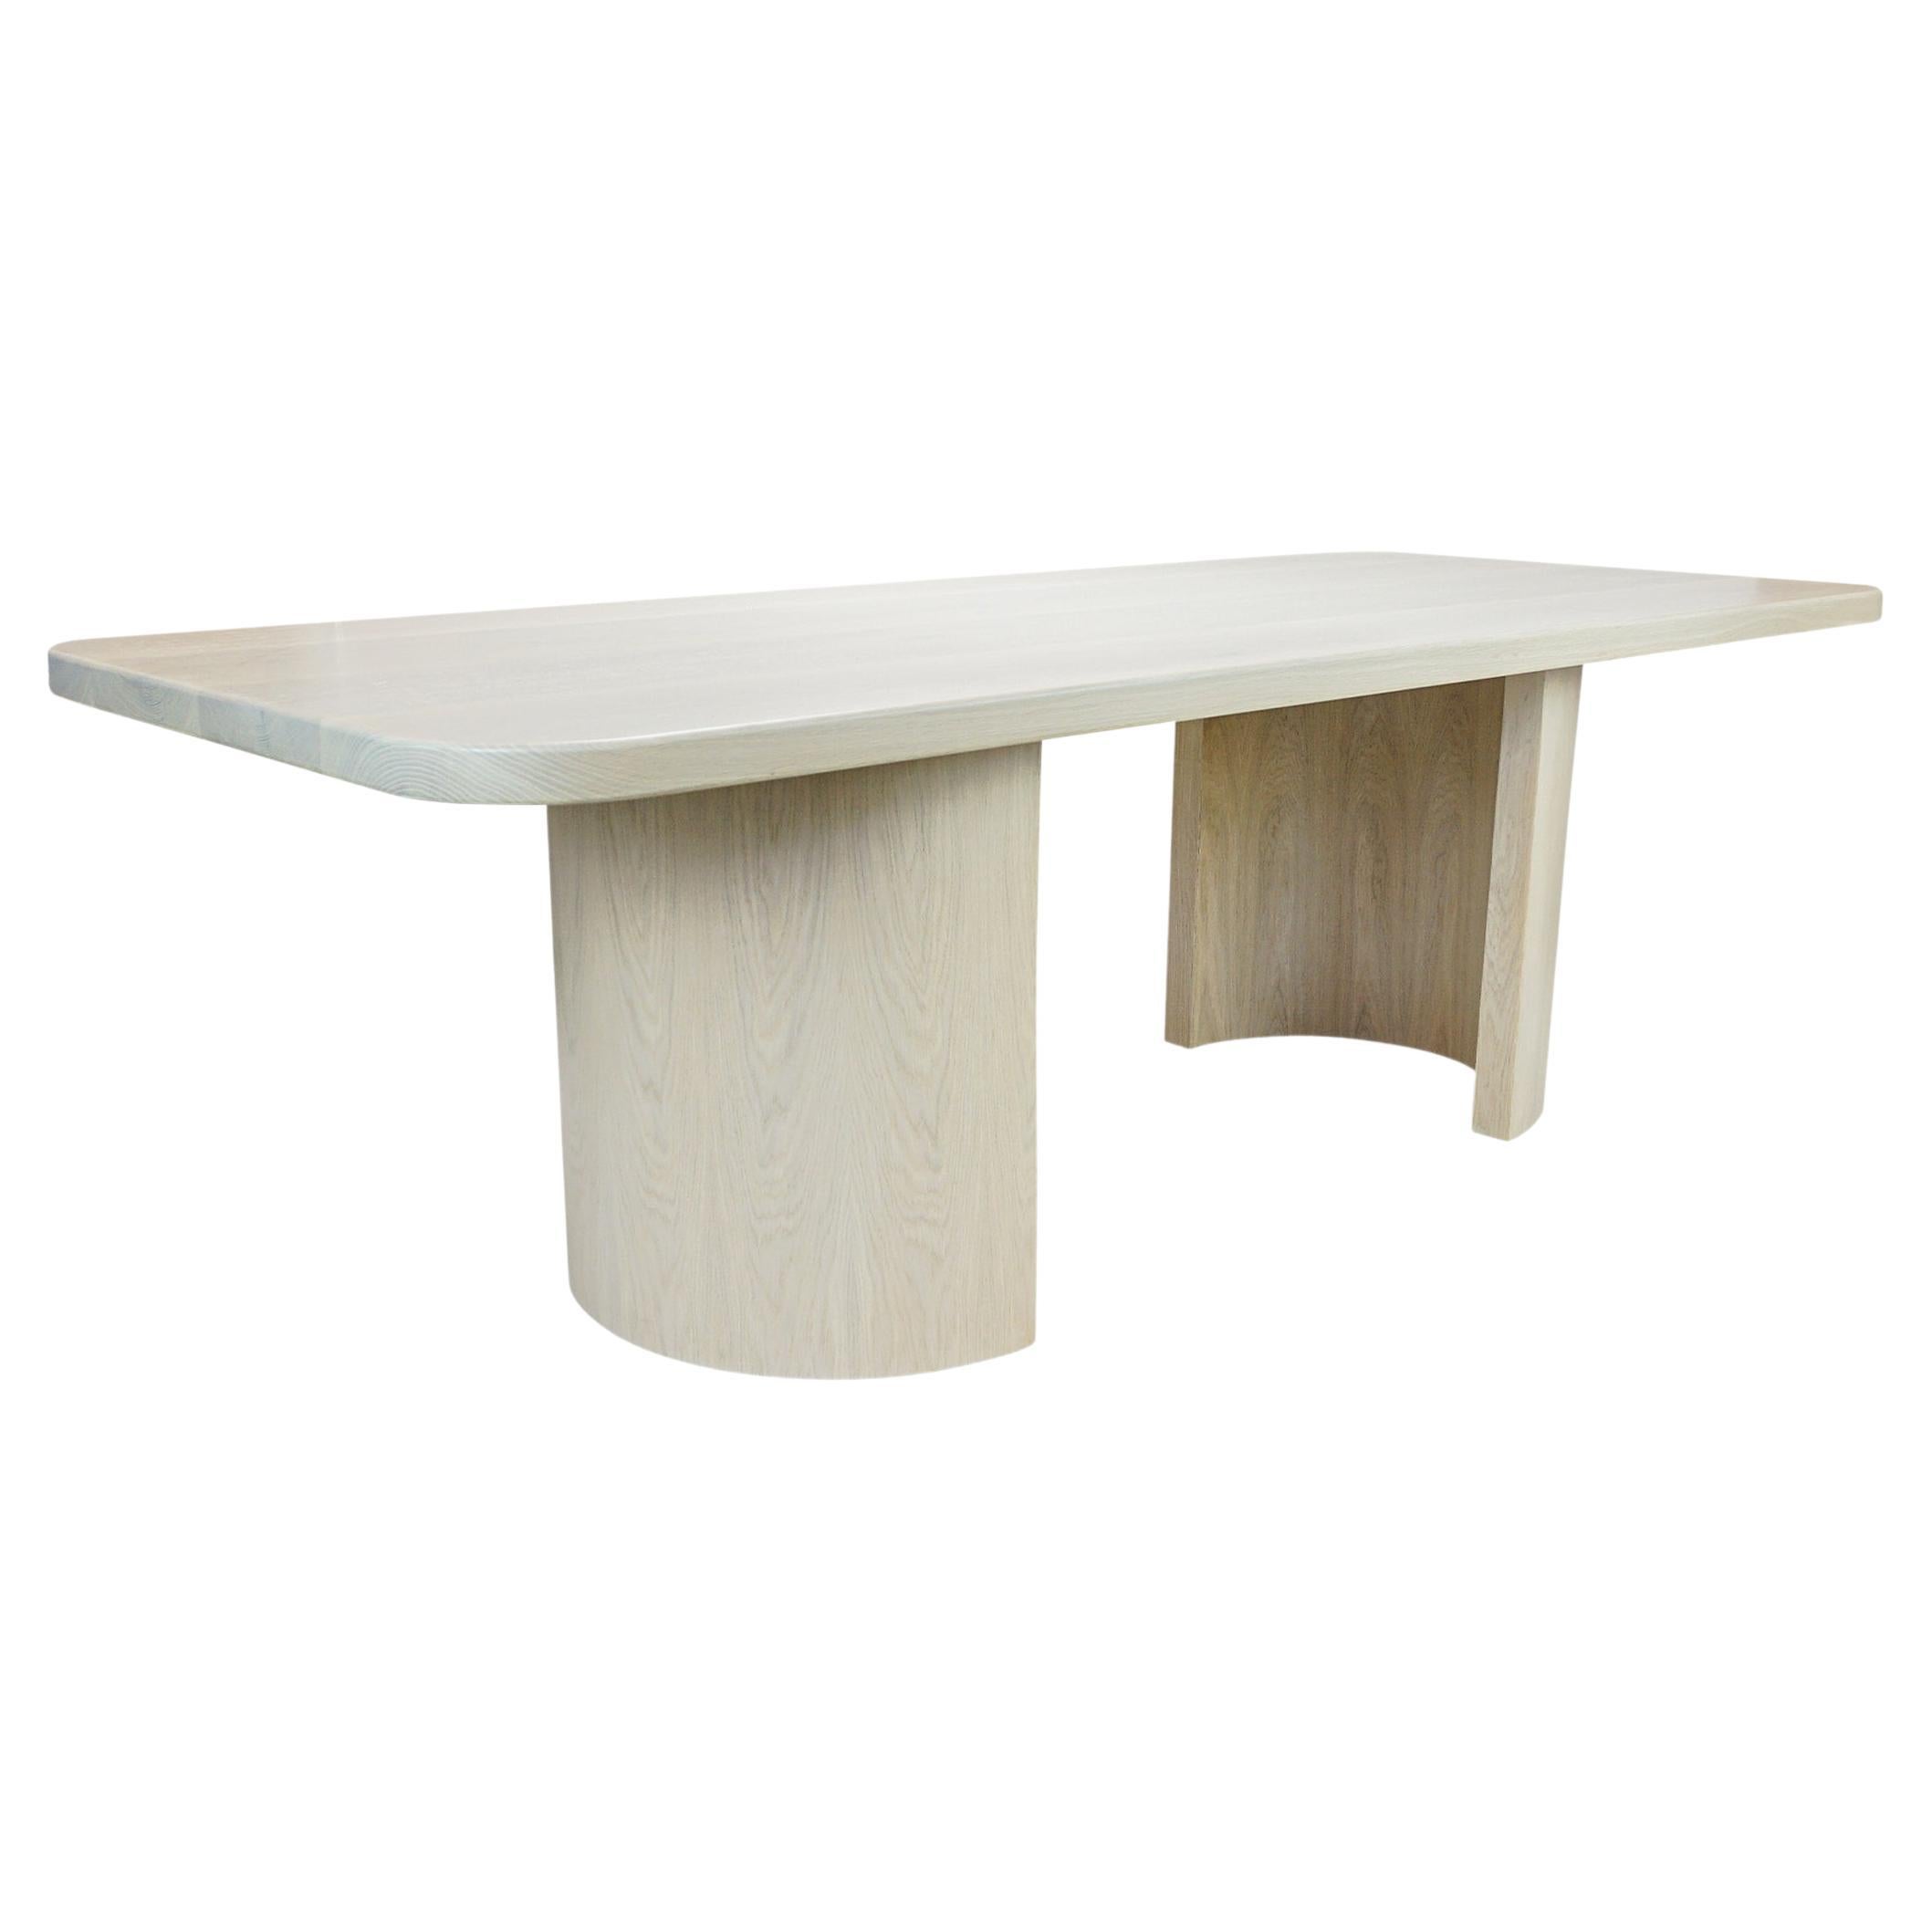 Modern white oak dining table with organic form. Finish shown is cerused / bleach solid white oak. Ask us about customization.

Overall: 96”W x 40”D x 30”H
Inside: 20”W x 11 1/2”D
Clearance from end of table to base: 16